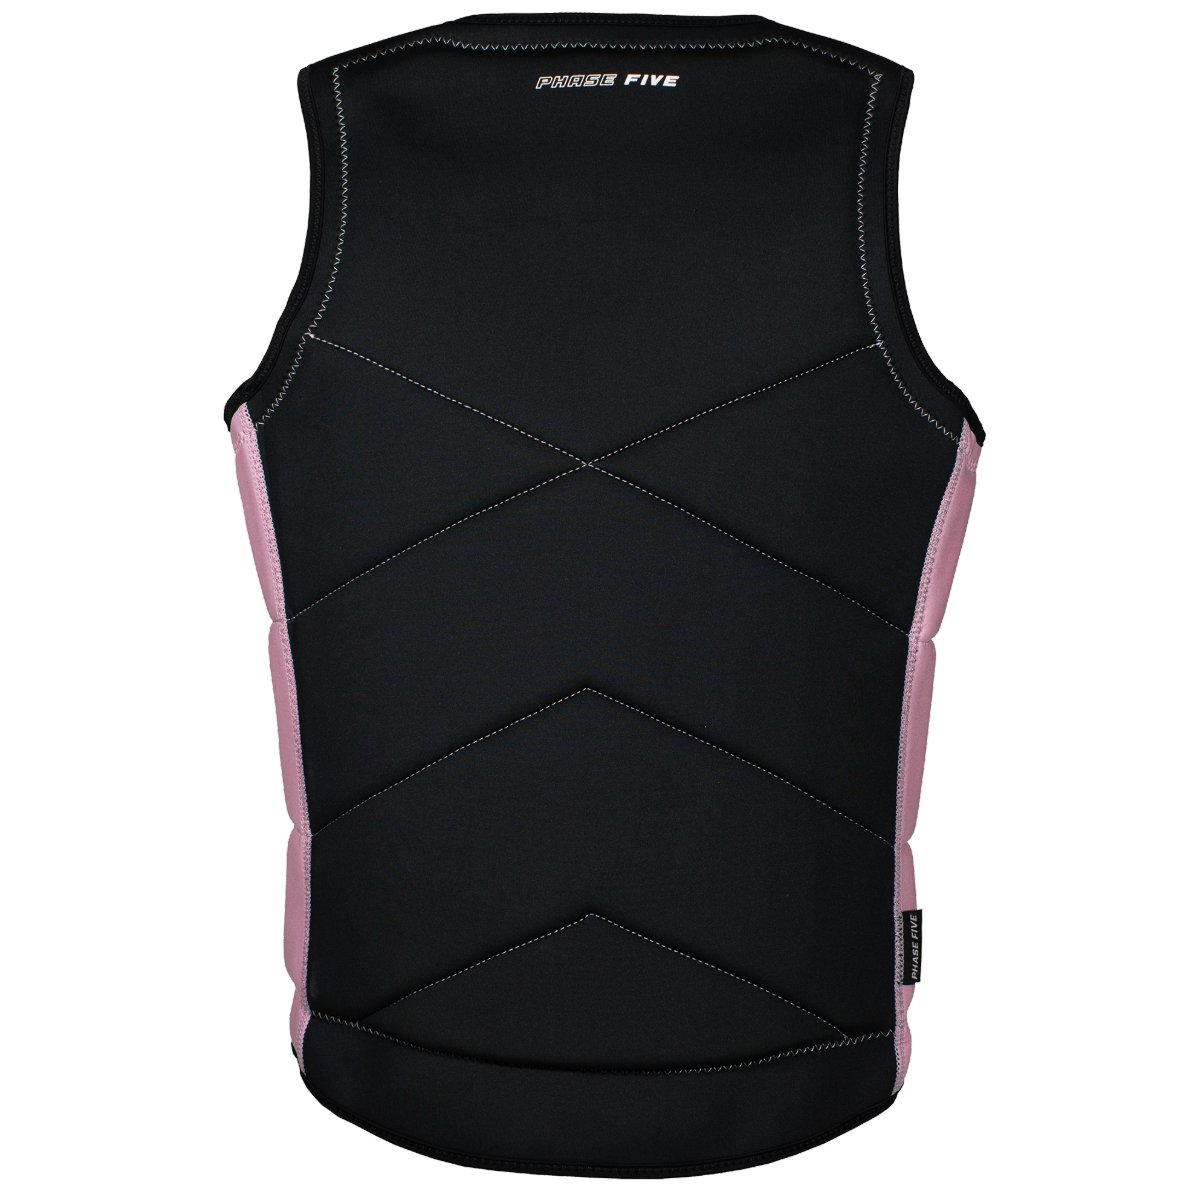 Phase 5 Ladies Pro Comp Wake Vest in Pink - BoardCo